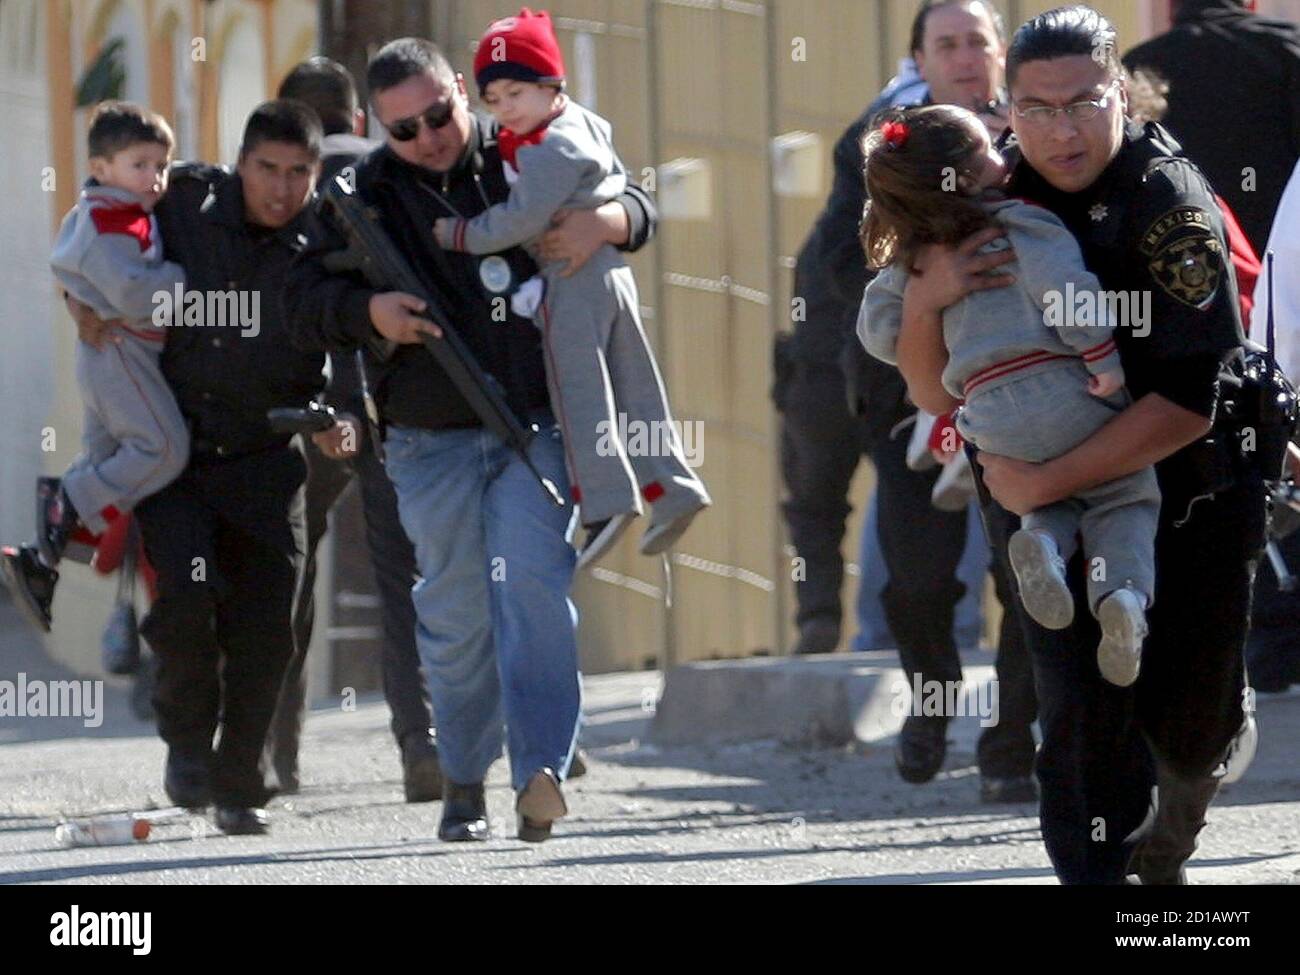 Police officers carry children away during a gun battle in Tijuana, in  Mexico's state of Baja California, January 17, 2008. A shootout on  Thursday, after police agents moved in on a drug